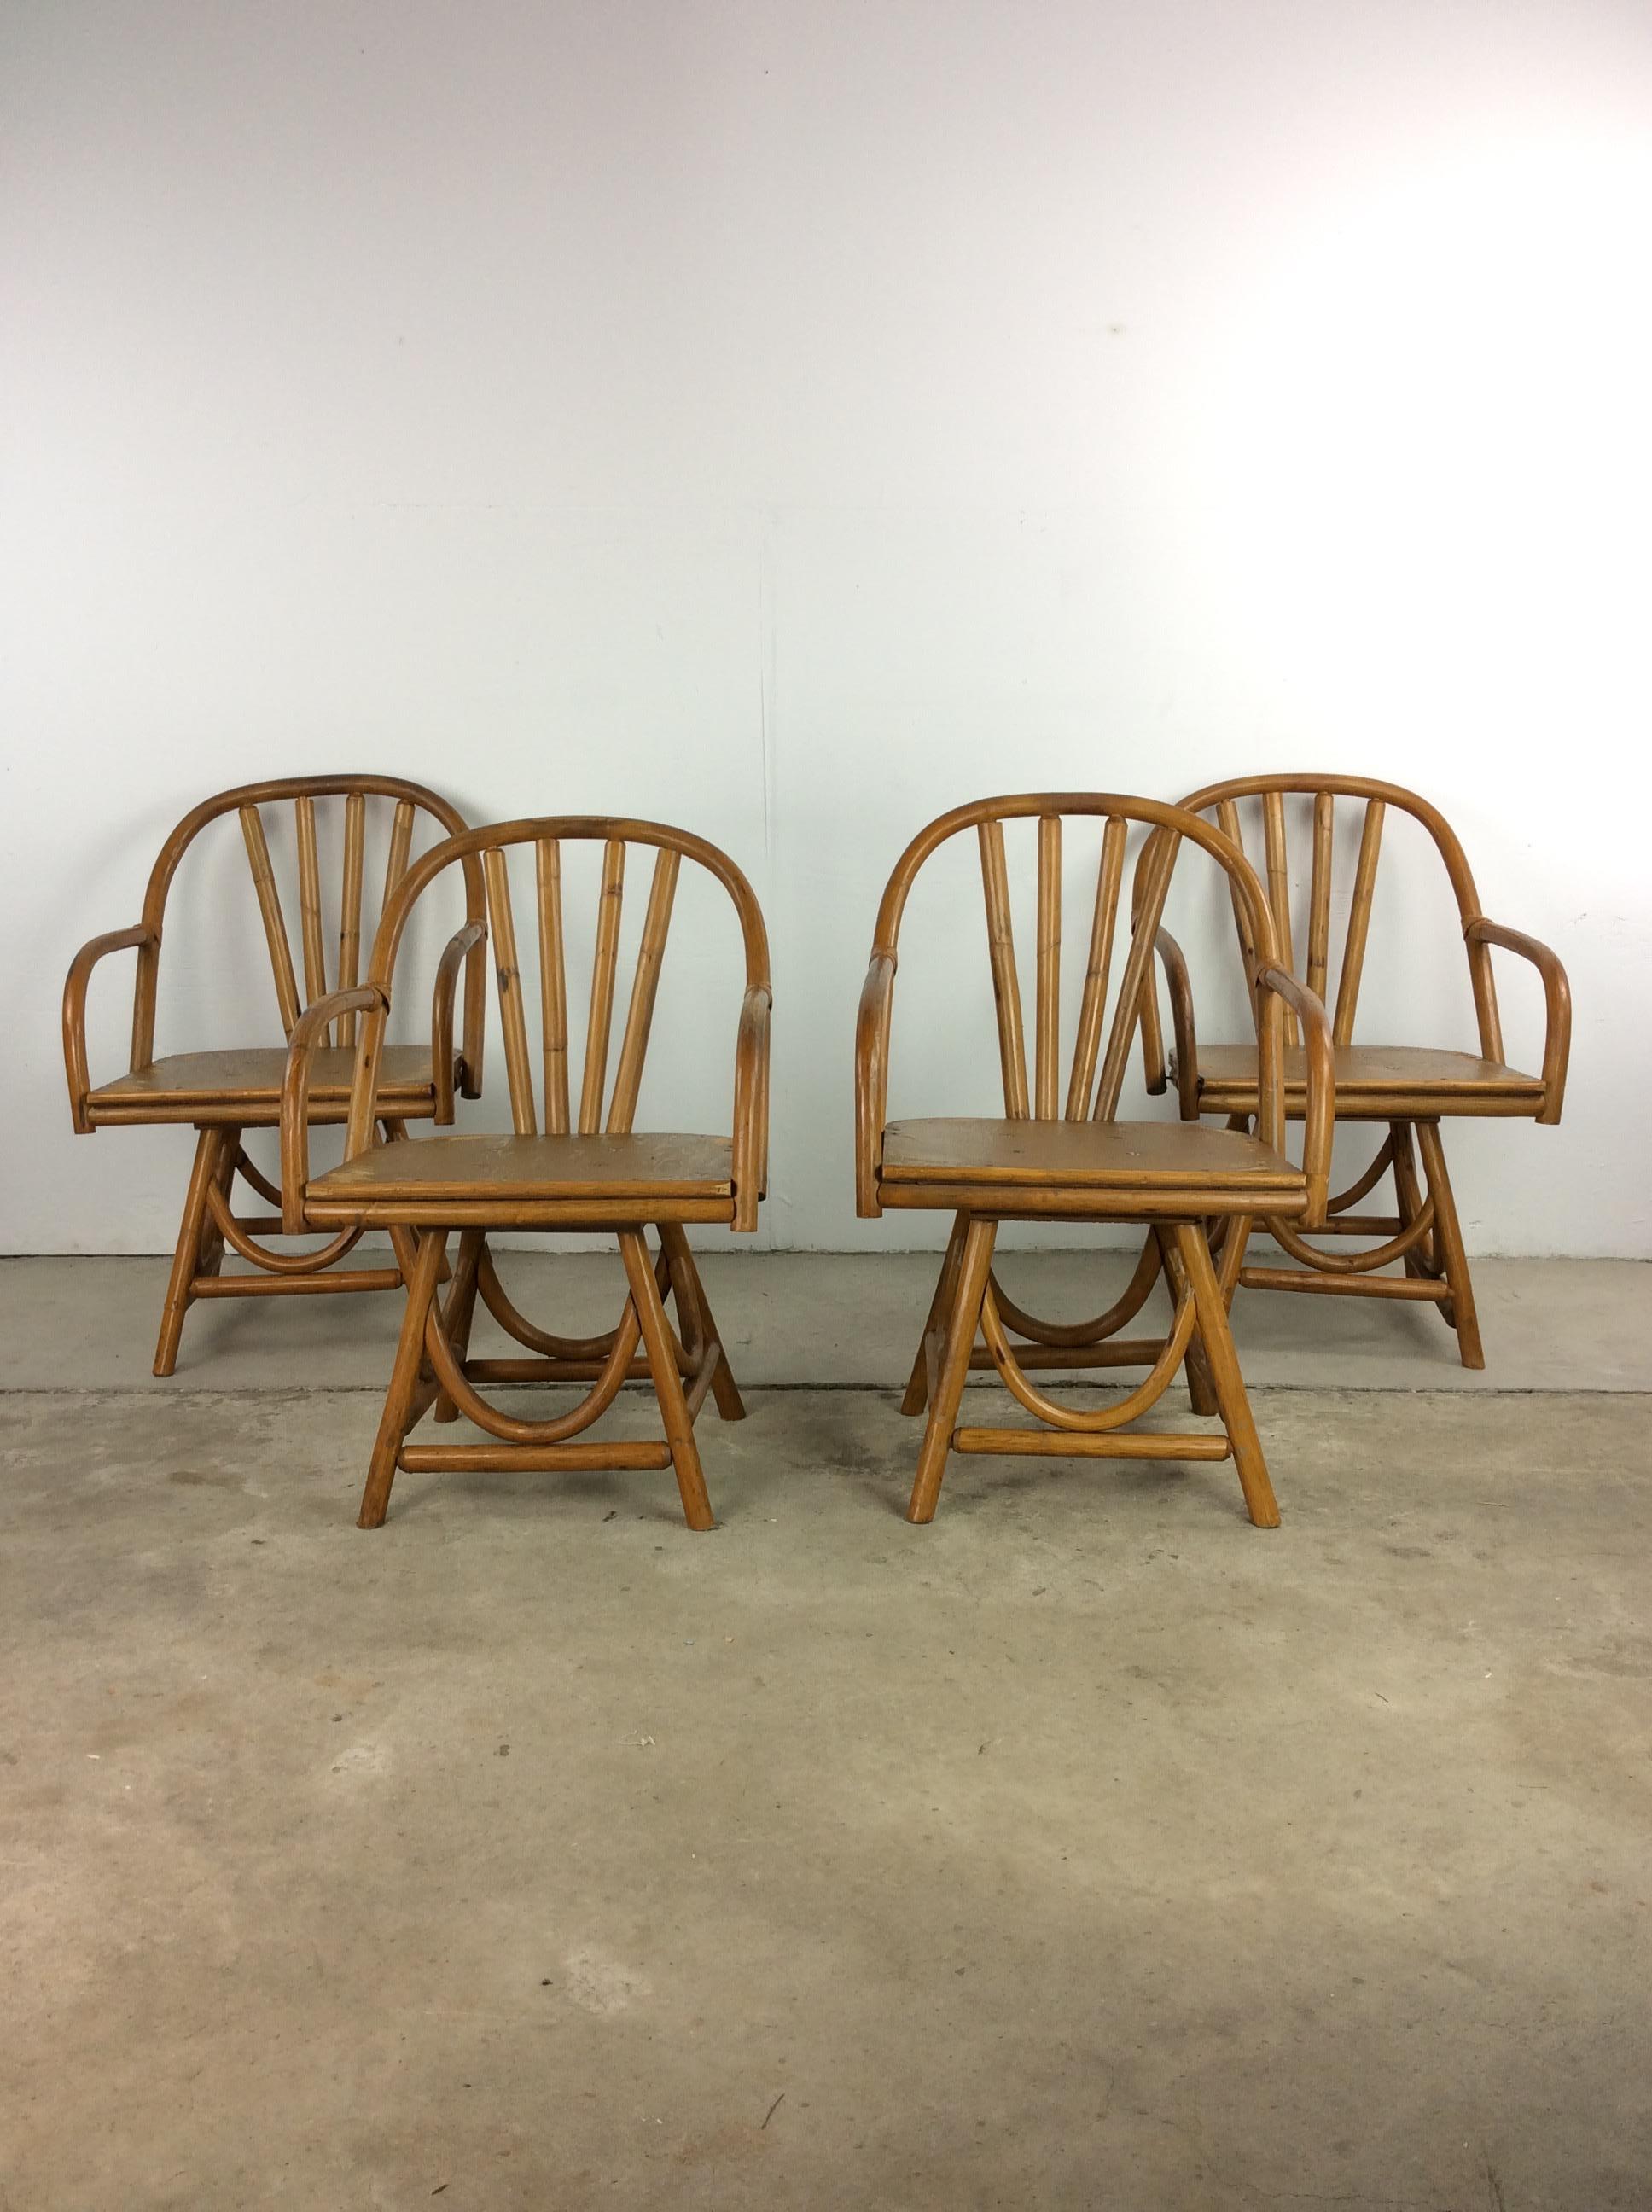 American Set of 4 Vintage Rattan Chairs with Swivel Base For Sale